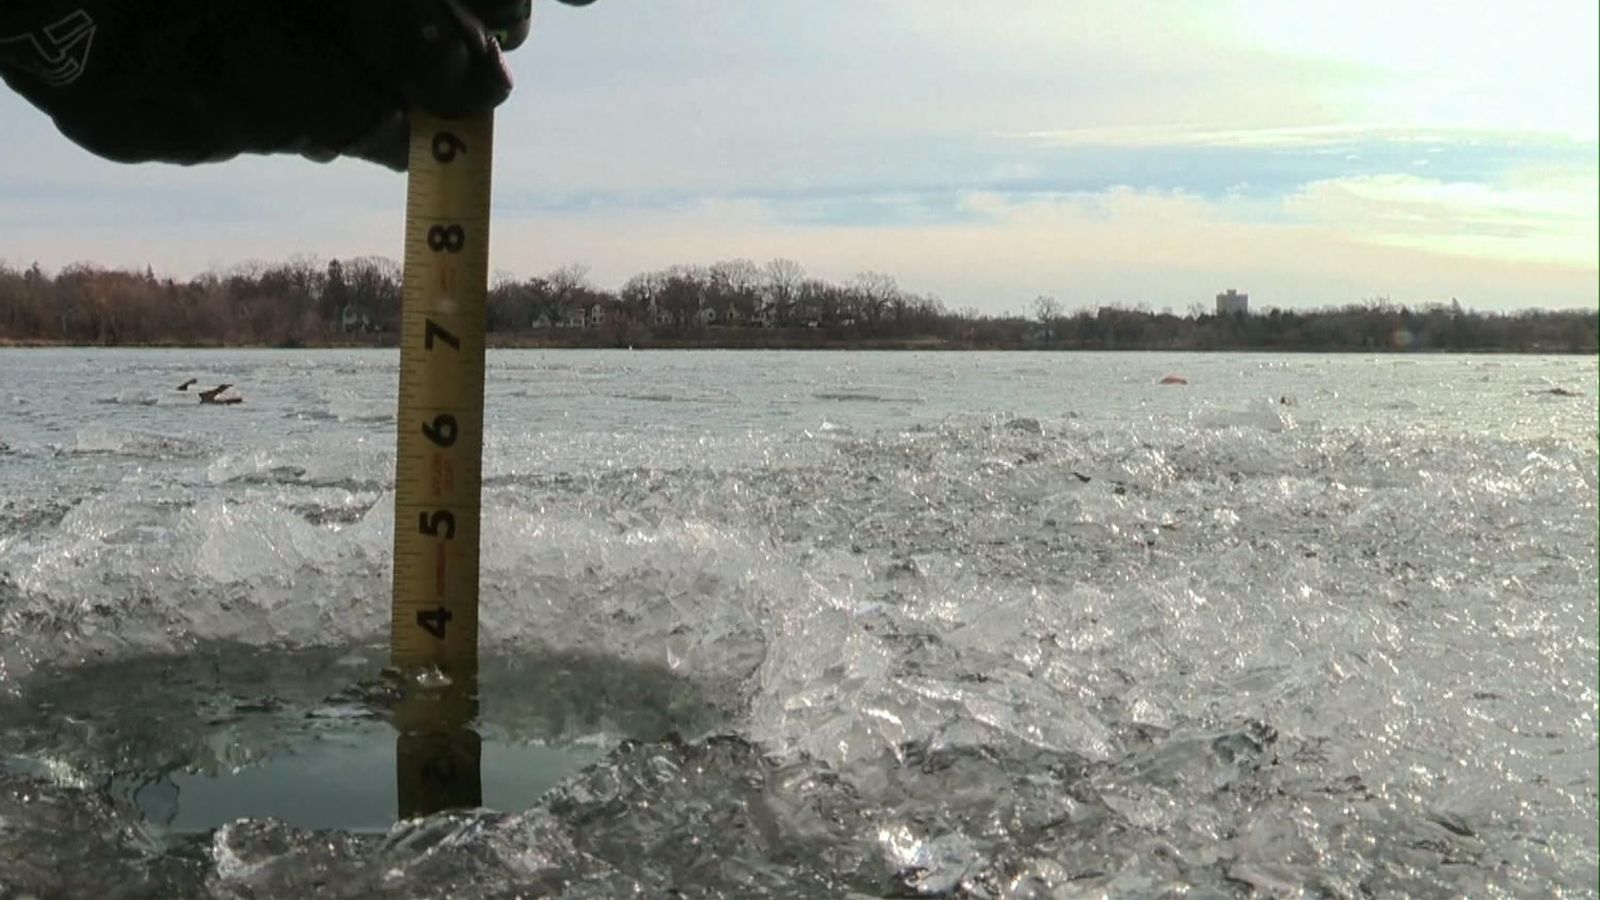 Over 100 Fishermen Rescued from Ice Floe in Minnesota Lake